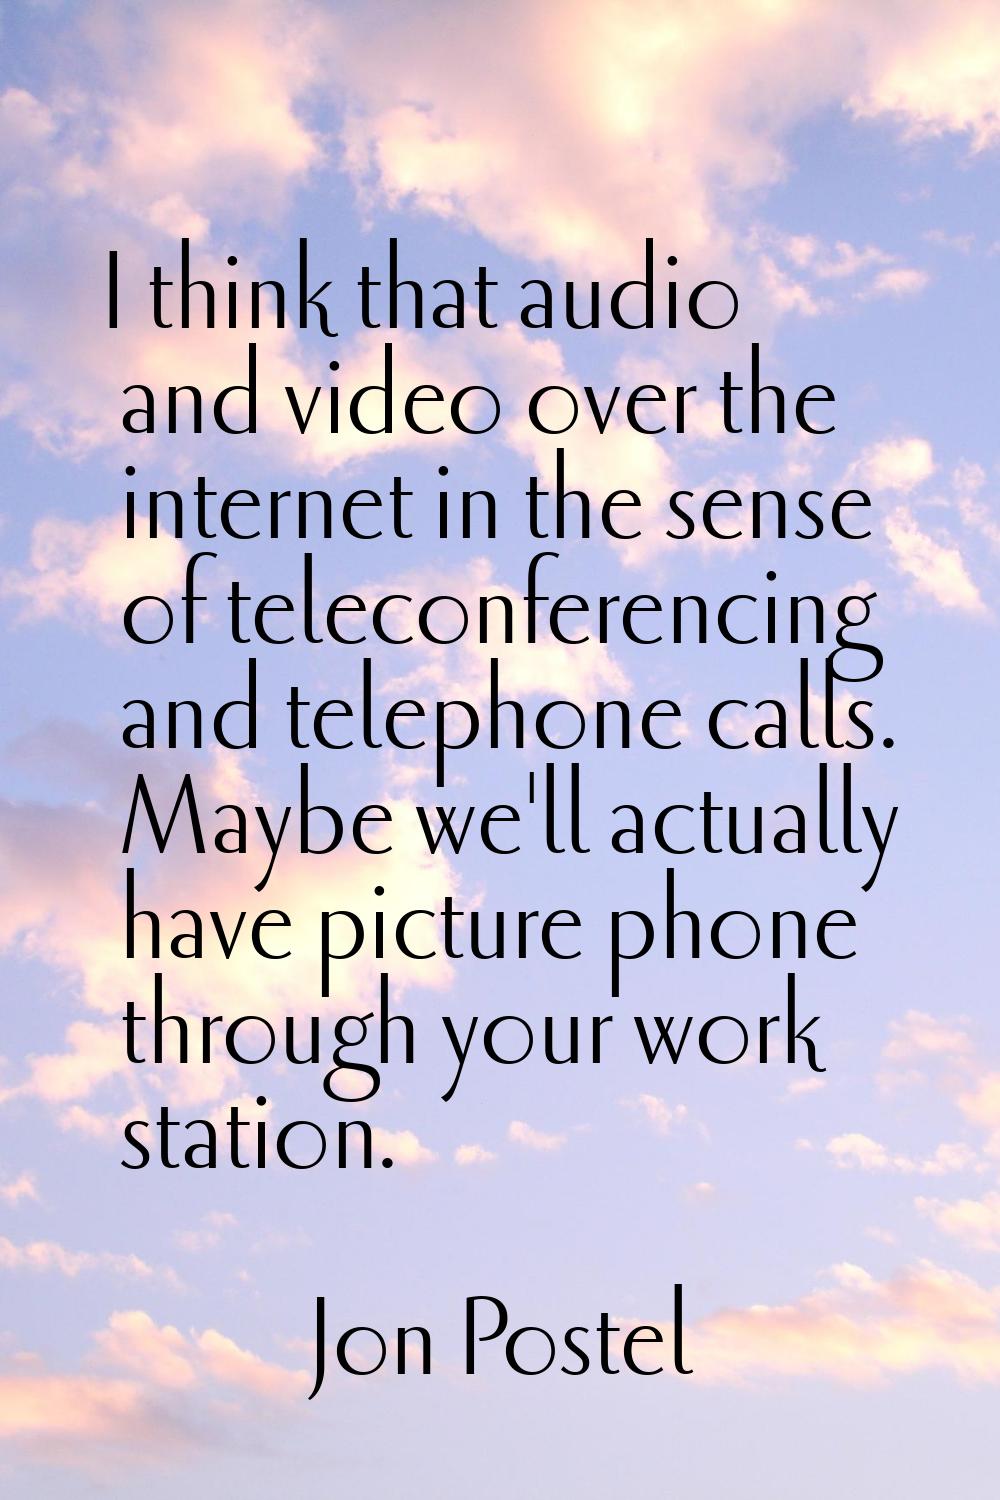 I think that audio and video over the internet in the sense of teleconferencing and telephone calls